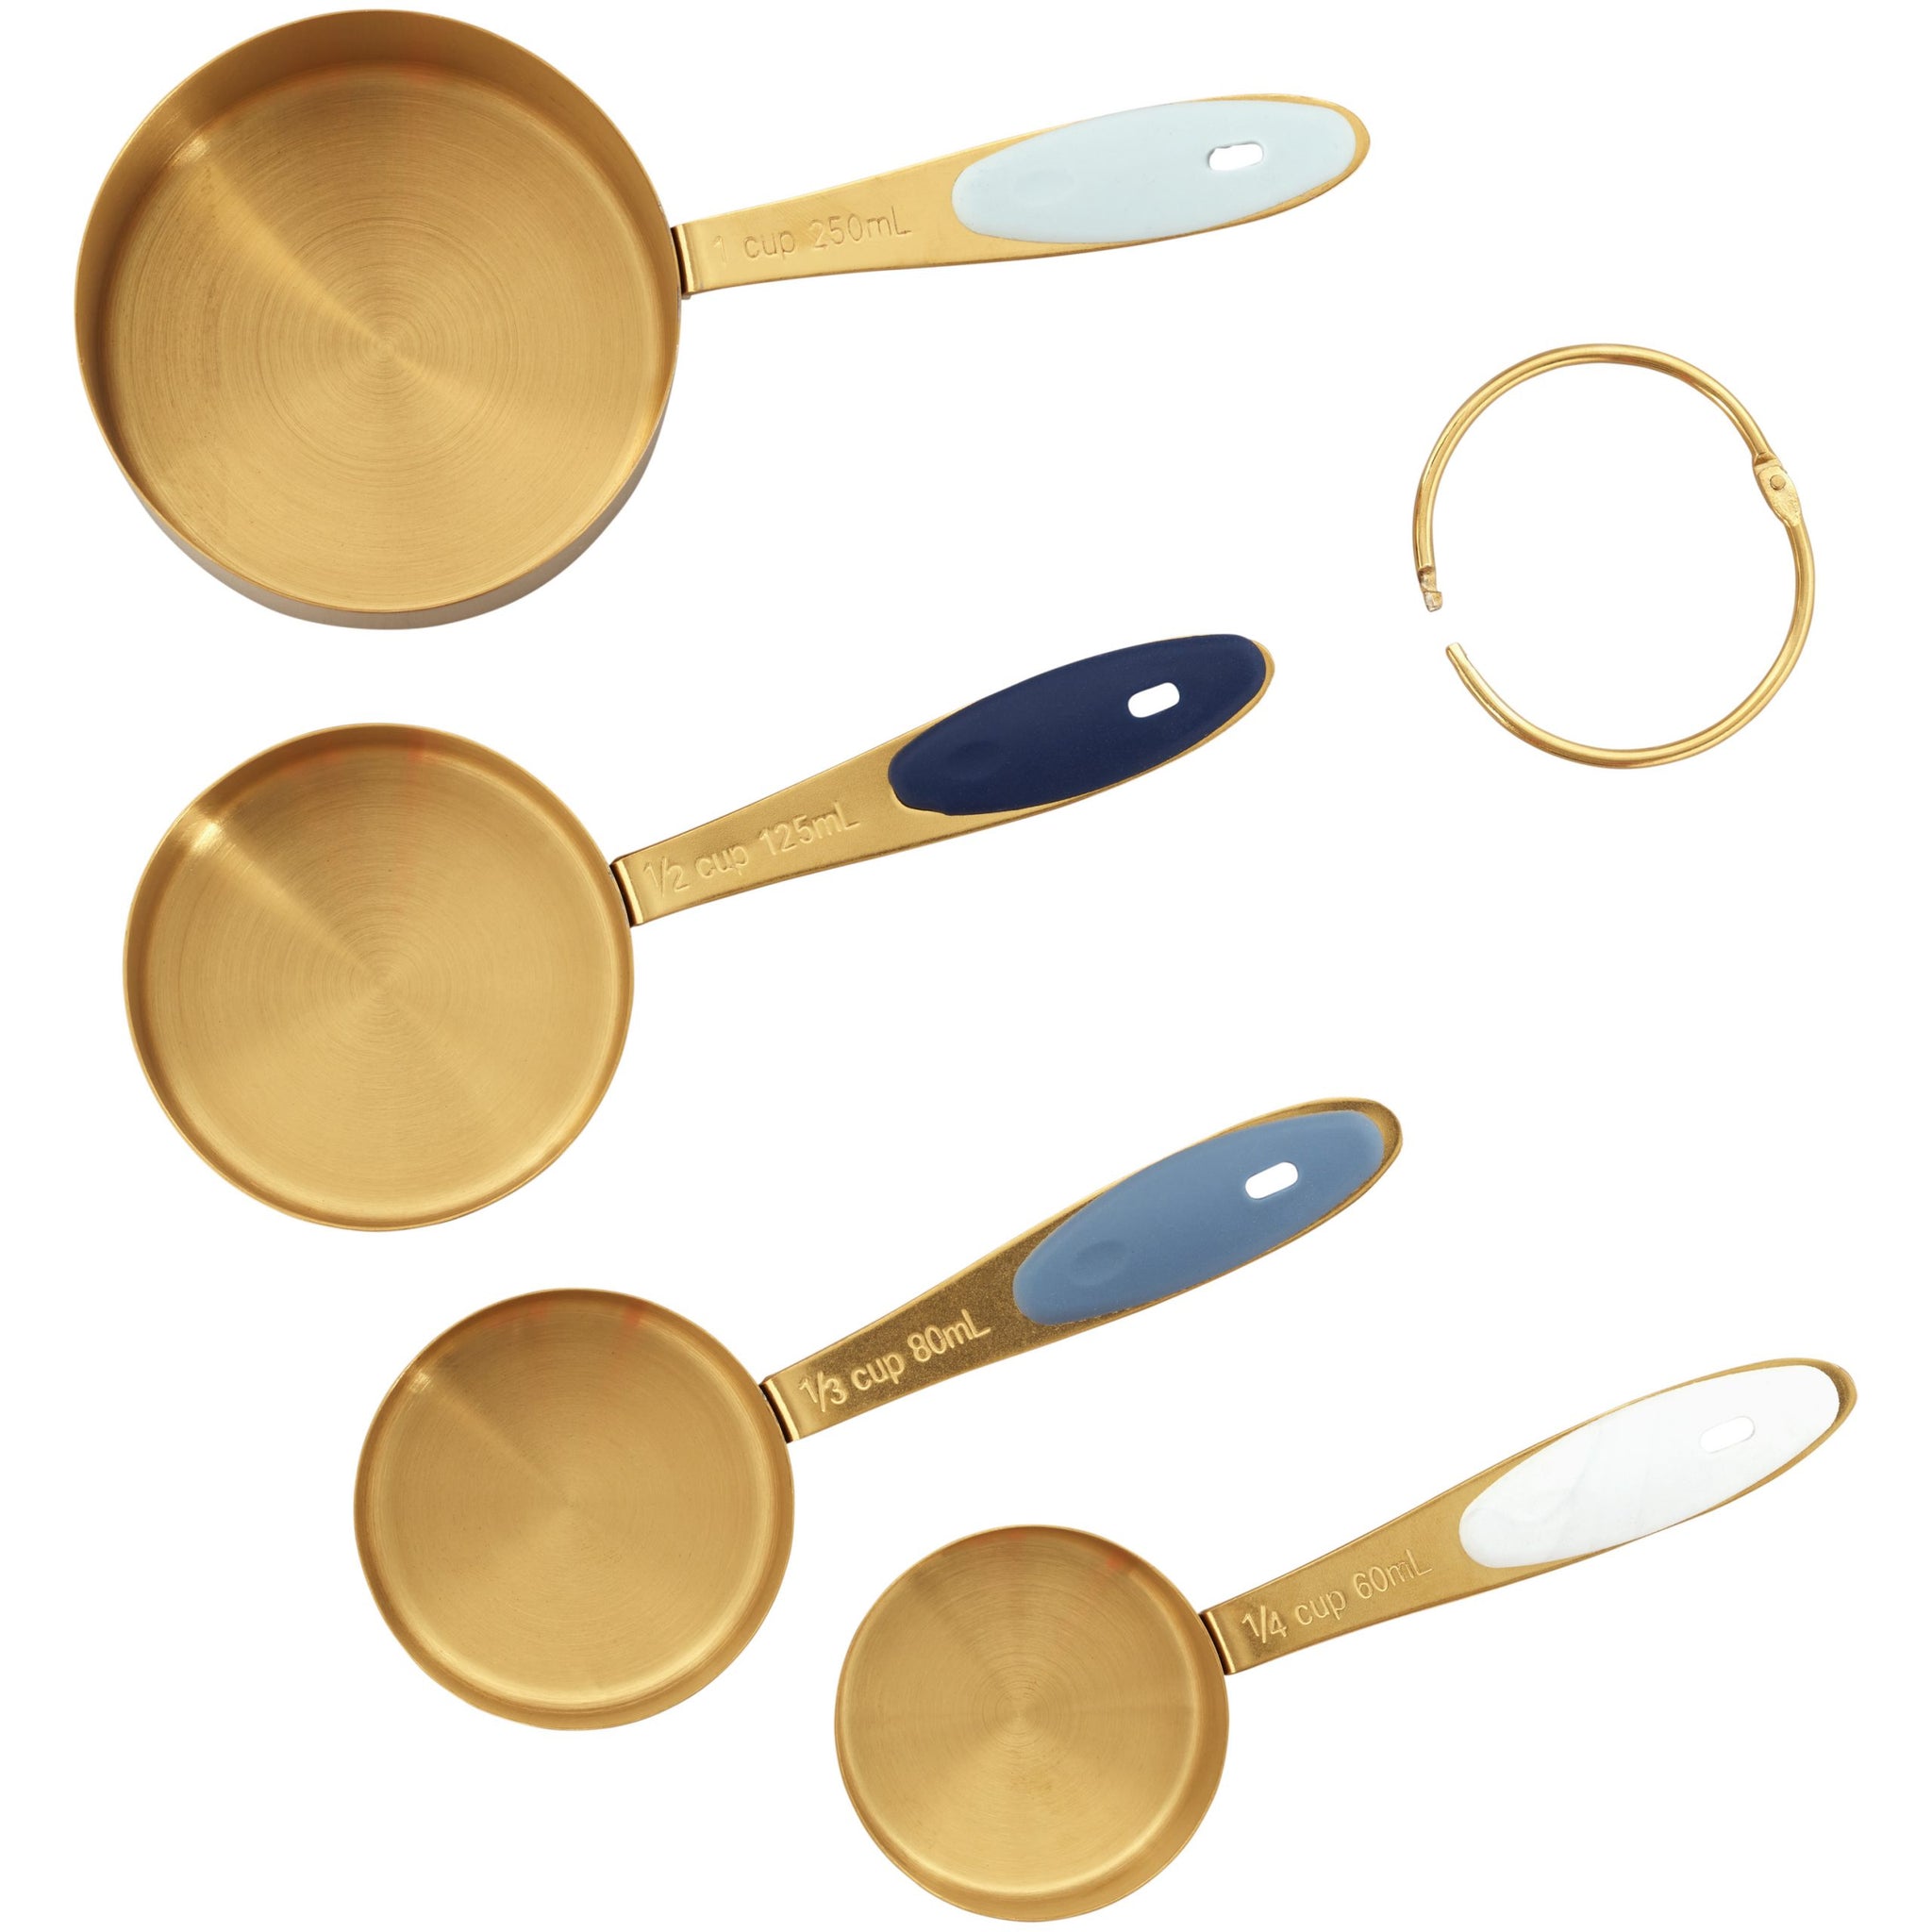 Wilton Gold Measuring Cups 4pc